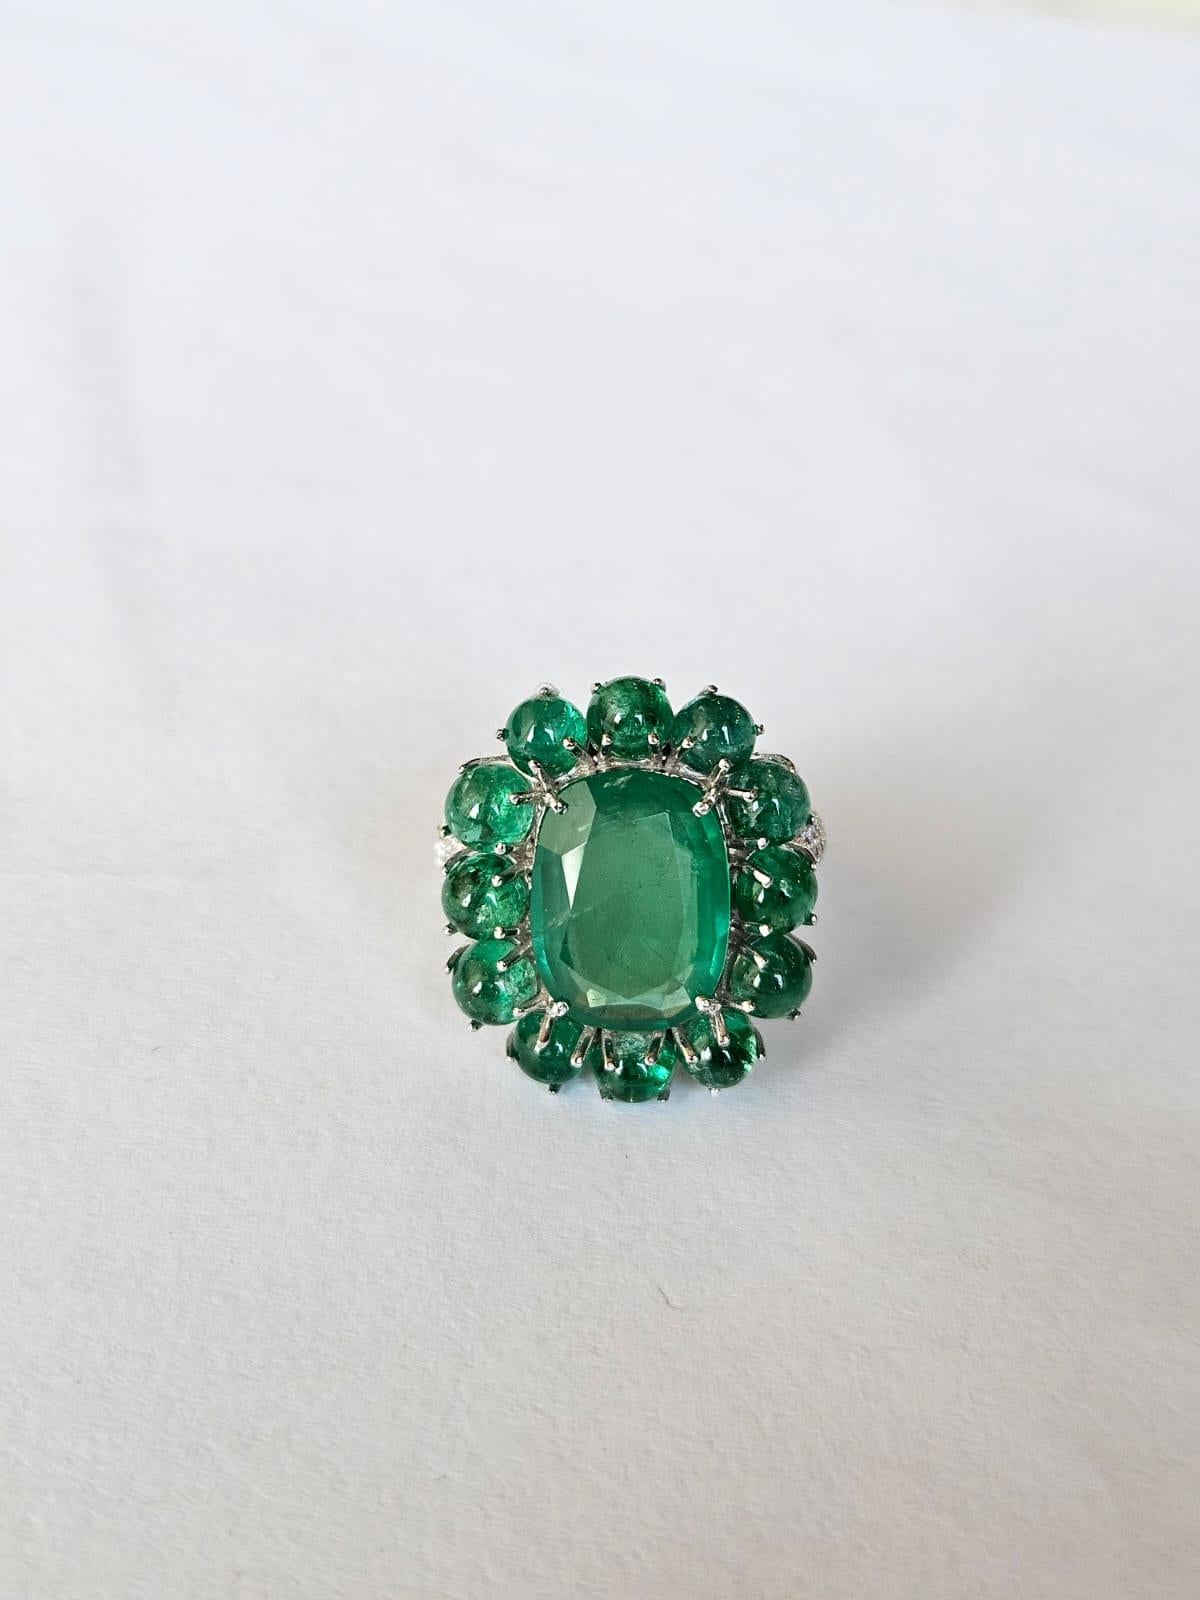 A very gorgeous and beautiful, Emerald Cocktail Ring set in 18K White Gold & Diamonds. The weight of the centre Emerald is 4.56 carats. The weight of the Emerald Cabochons is 5.60 carats. Both Emeralds are completely natural, without any treatment